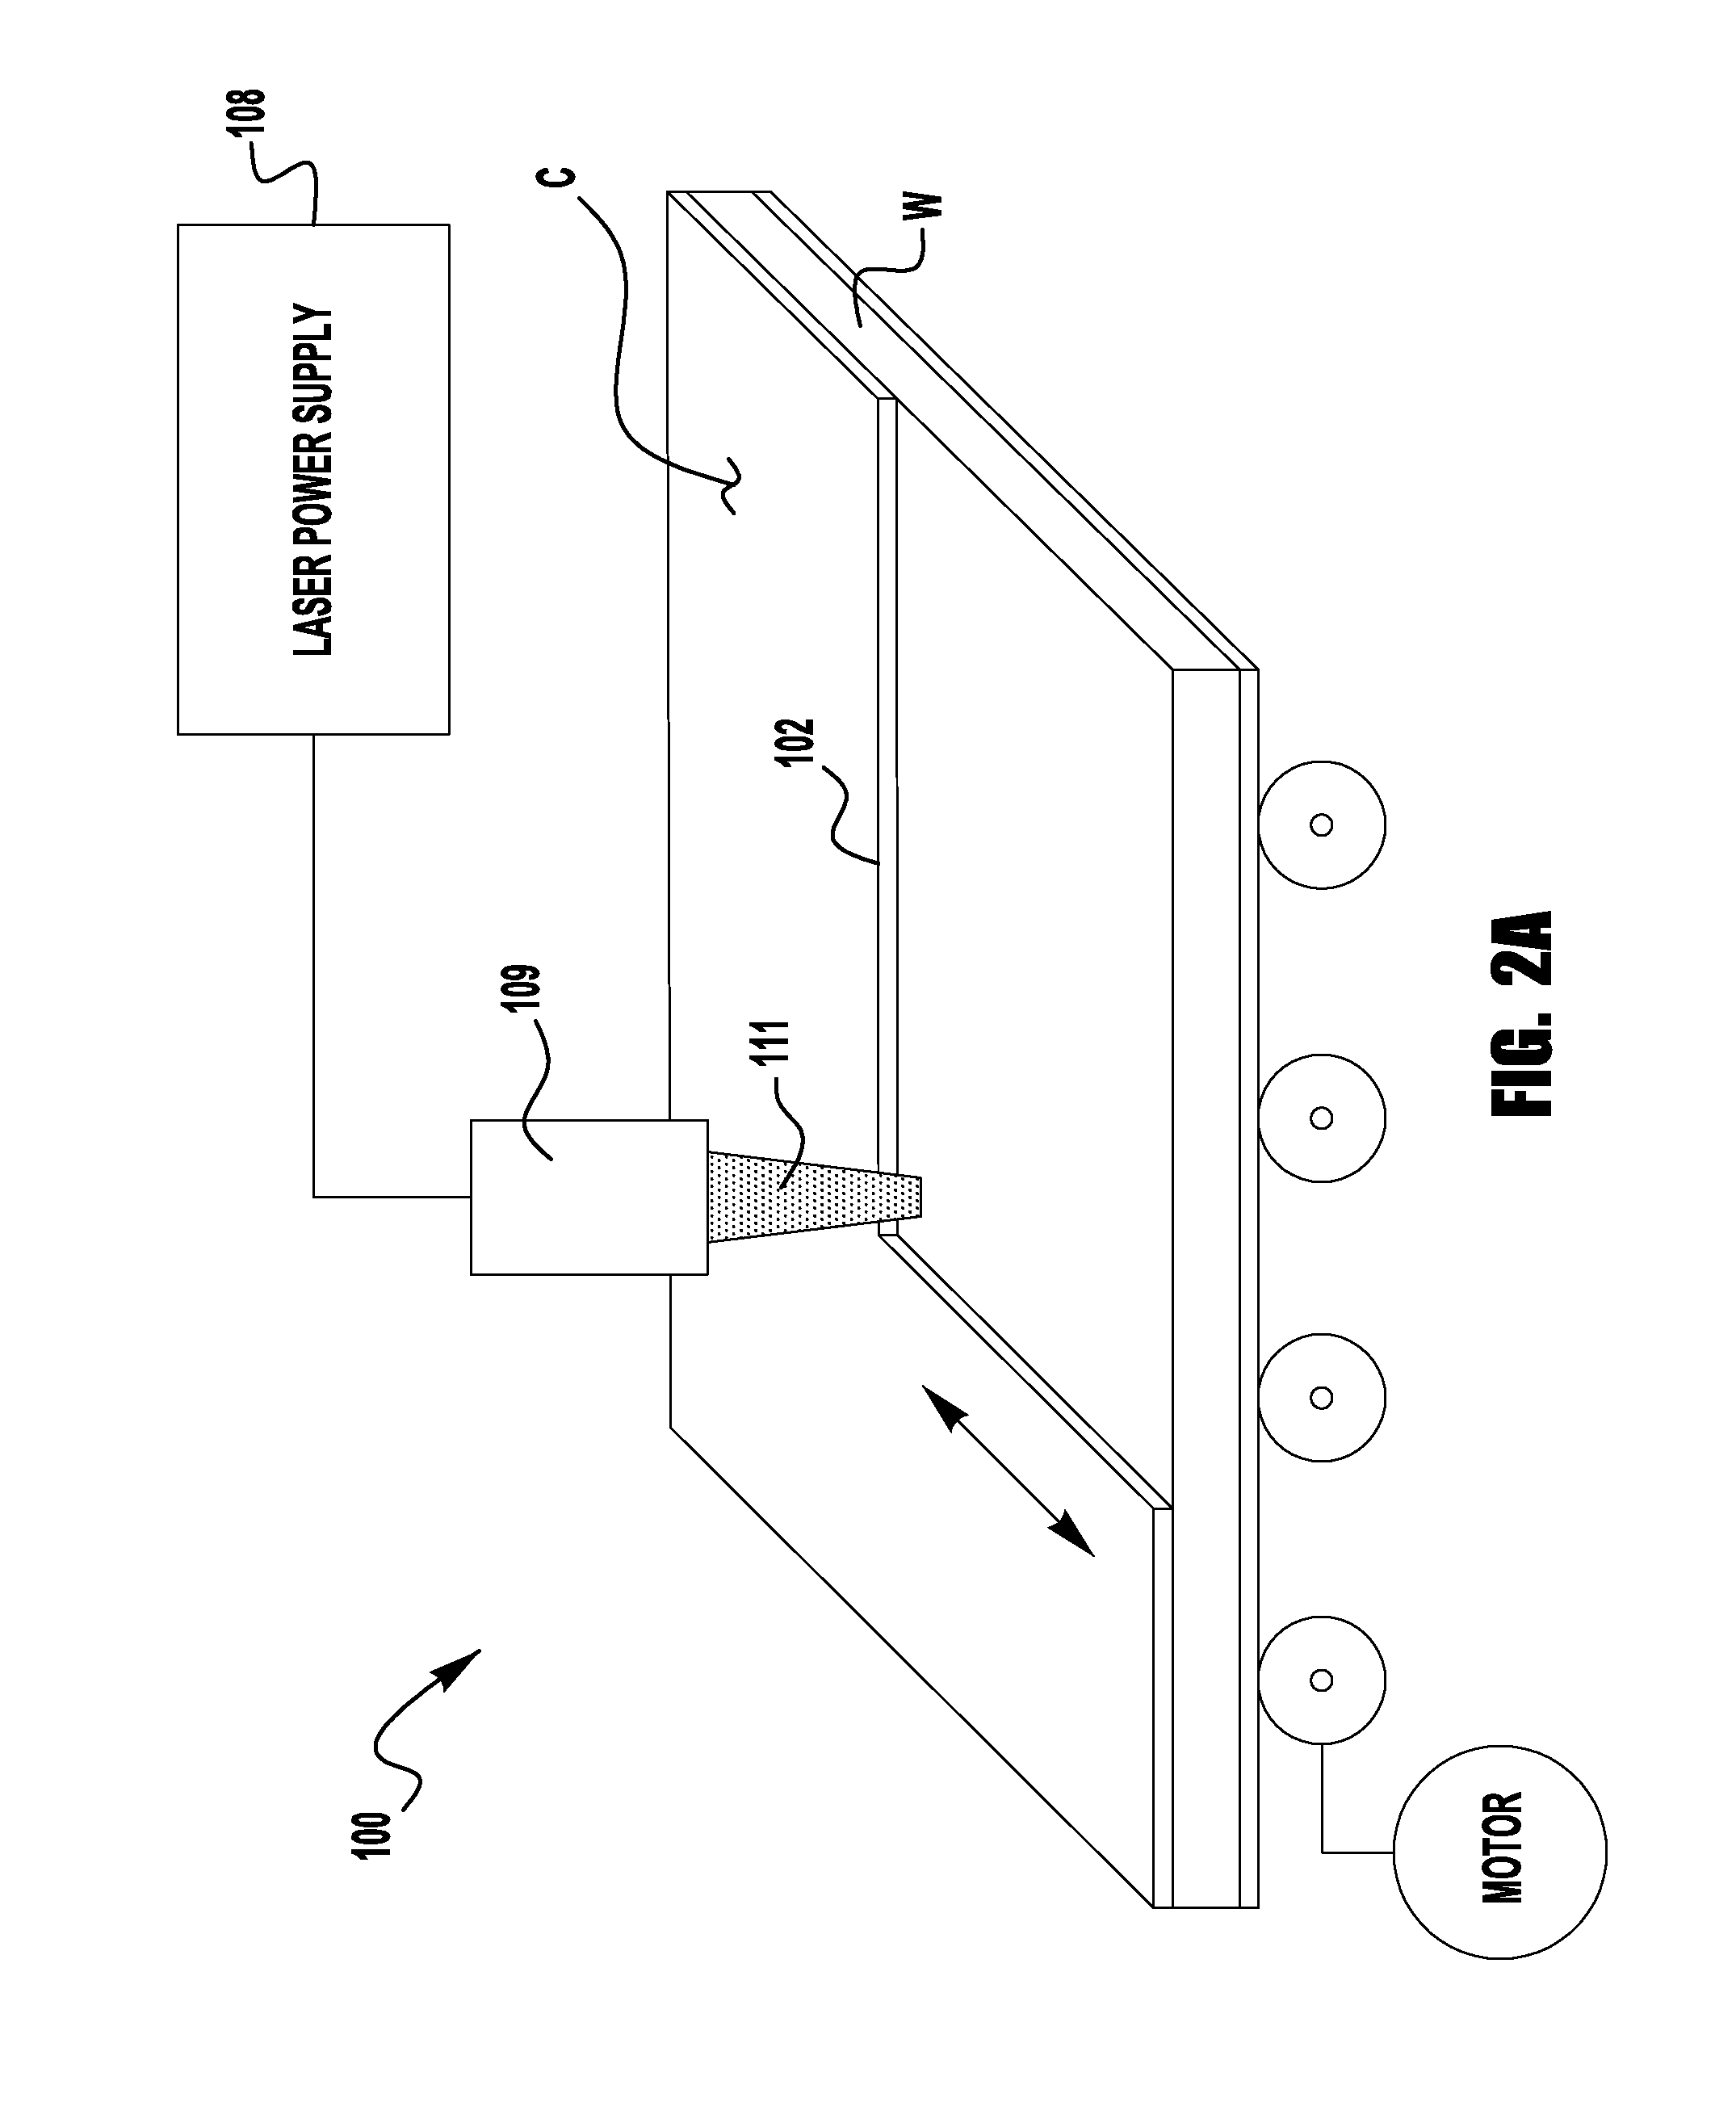 Apparatus and method for post weld laser release of gas build up in a gmaw weld